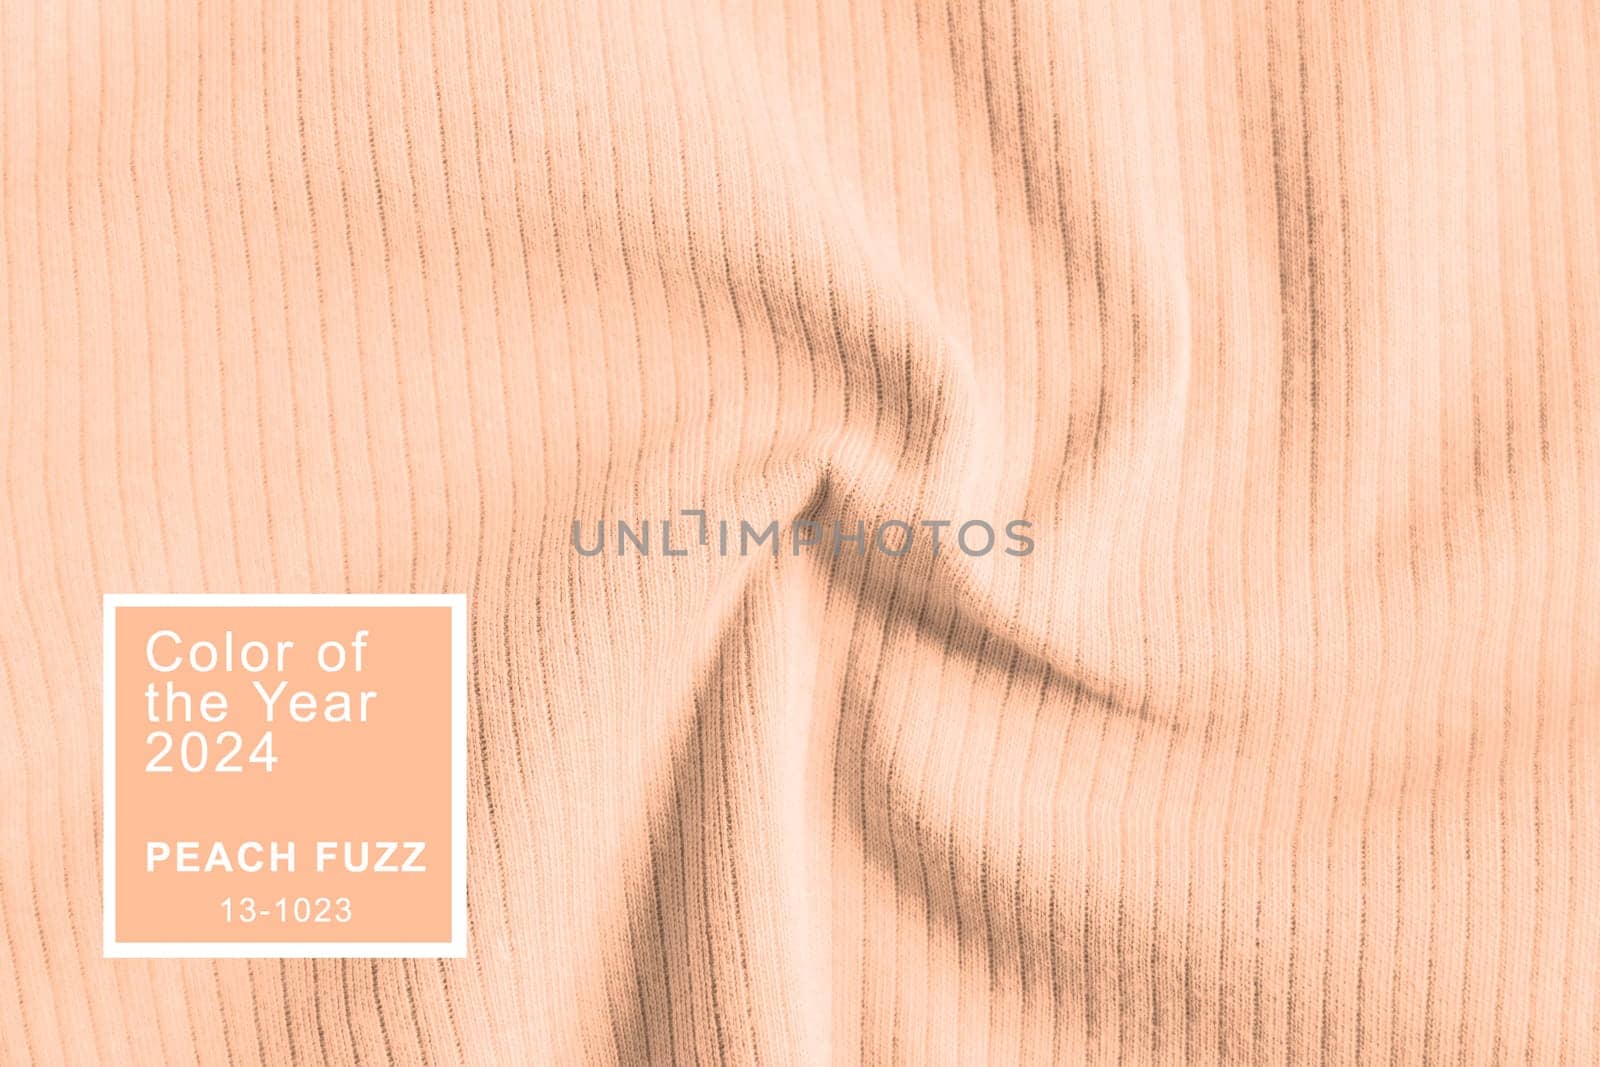 Peach Fuzz color of the year 2024. Waved ribbed cotton fabric texture pastel orange color . Close up rib cotton cloth and textiles pattern. Natural organic fabrics texture background